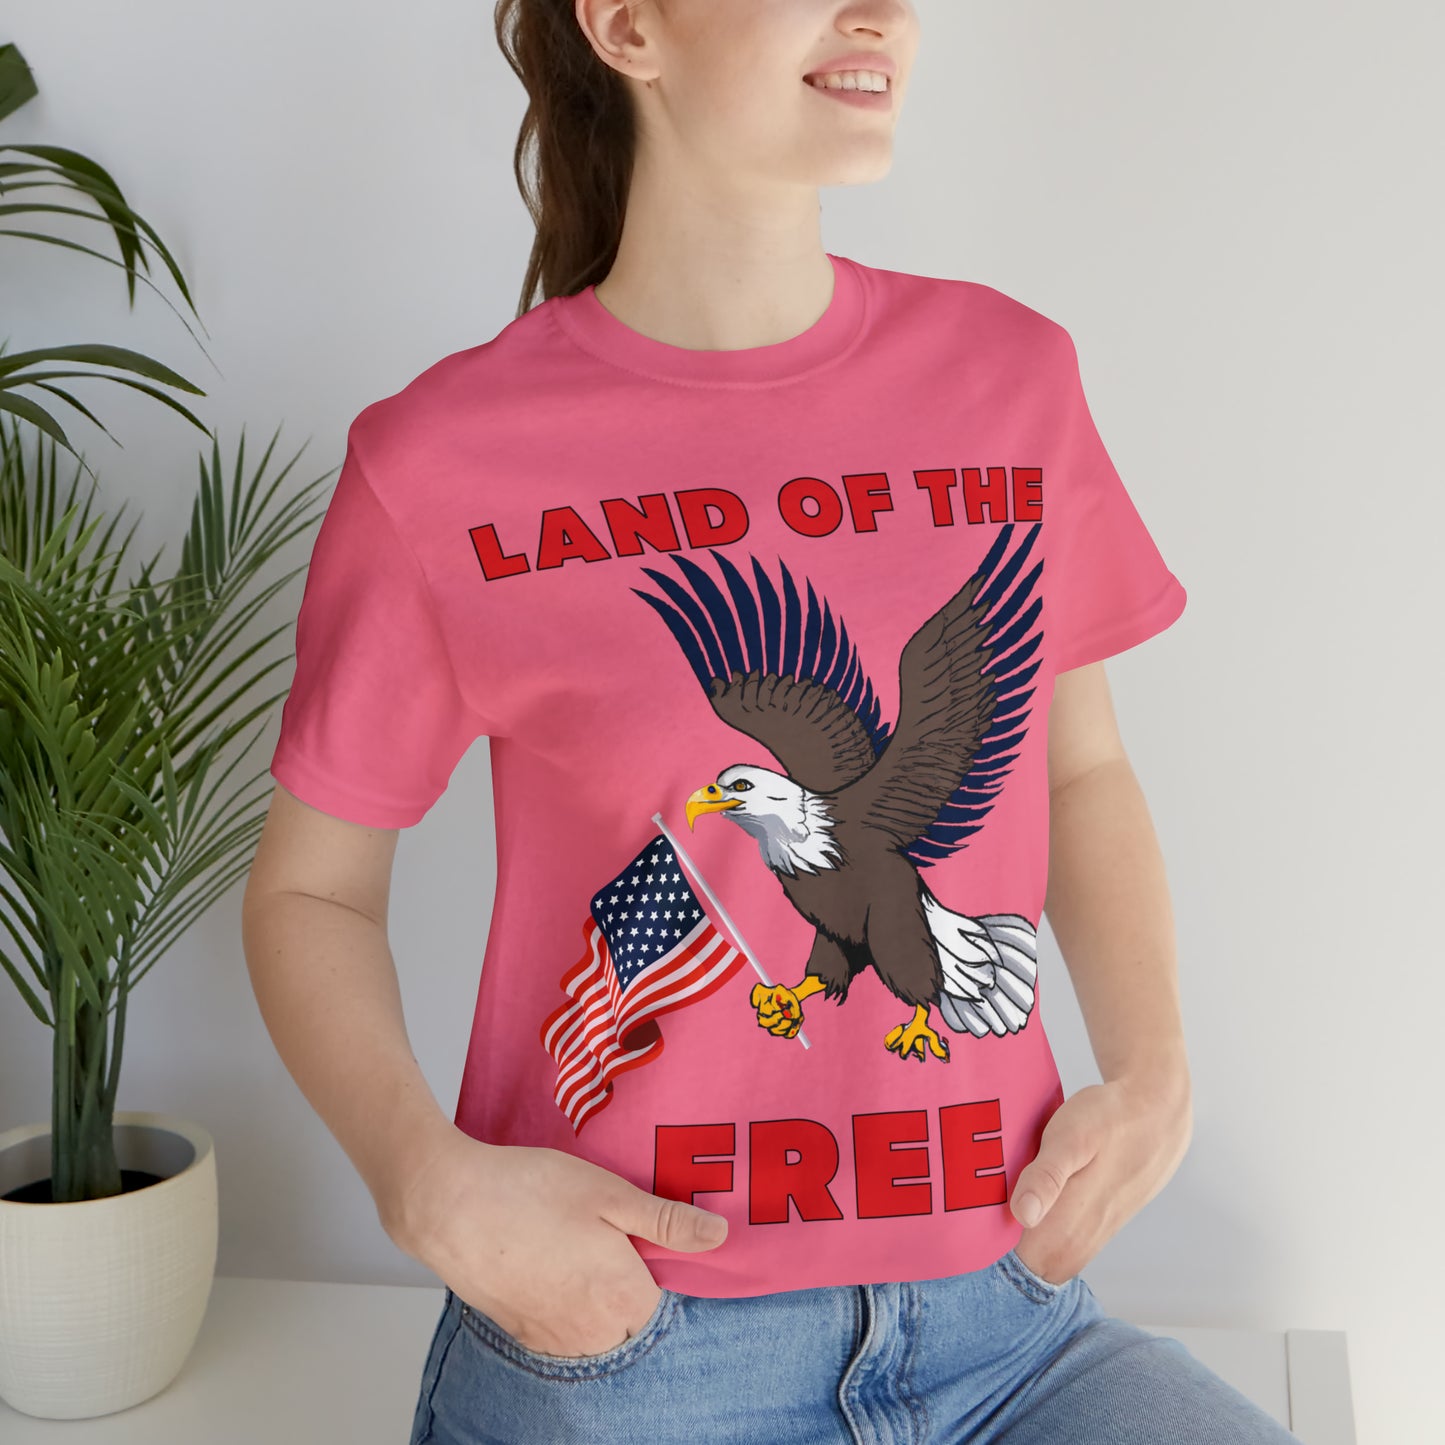 Land of the Free: Celebrate Independence Day with Patriotic Shirts, Flag shirt - Freedom, Fireworks, and More